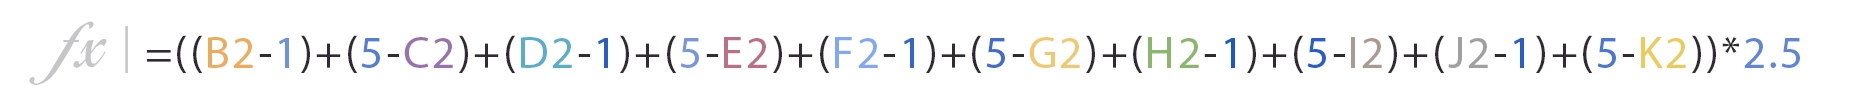 This formula is used for scoring SUS in a usability session.